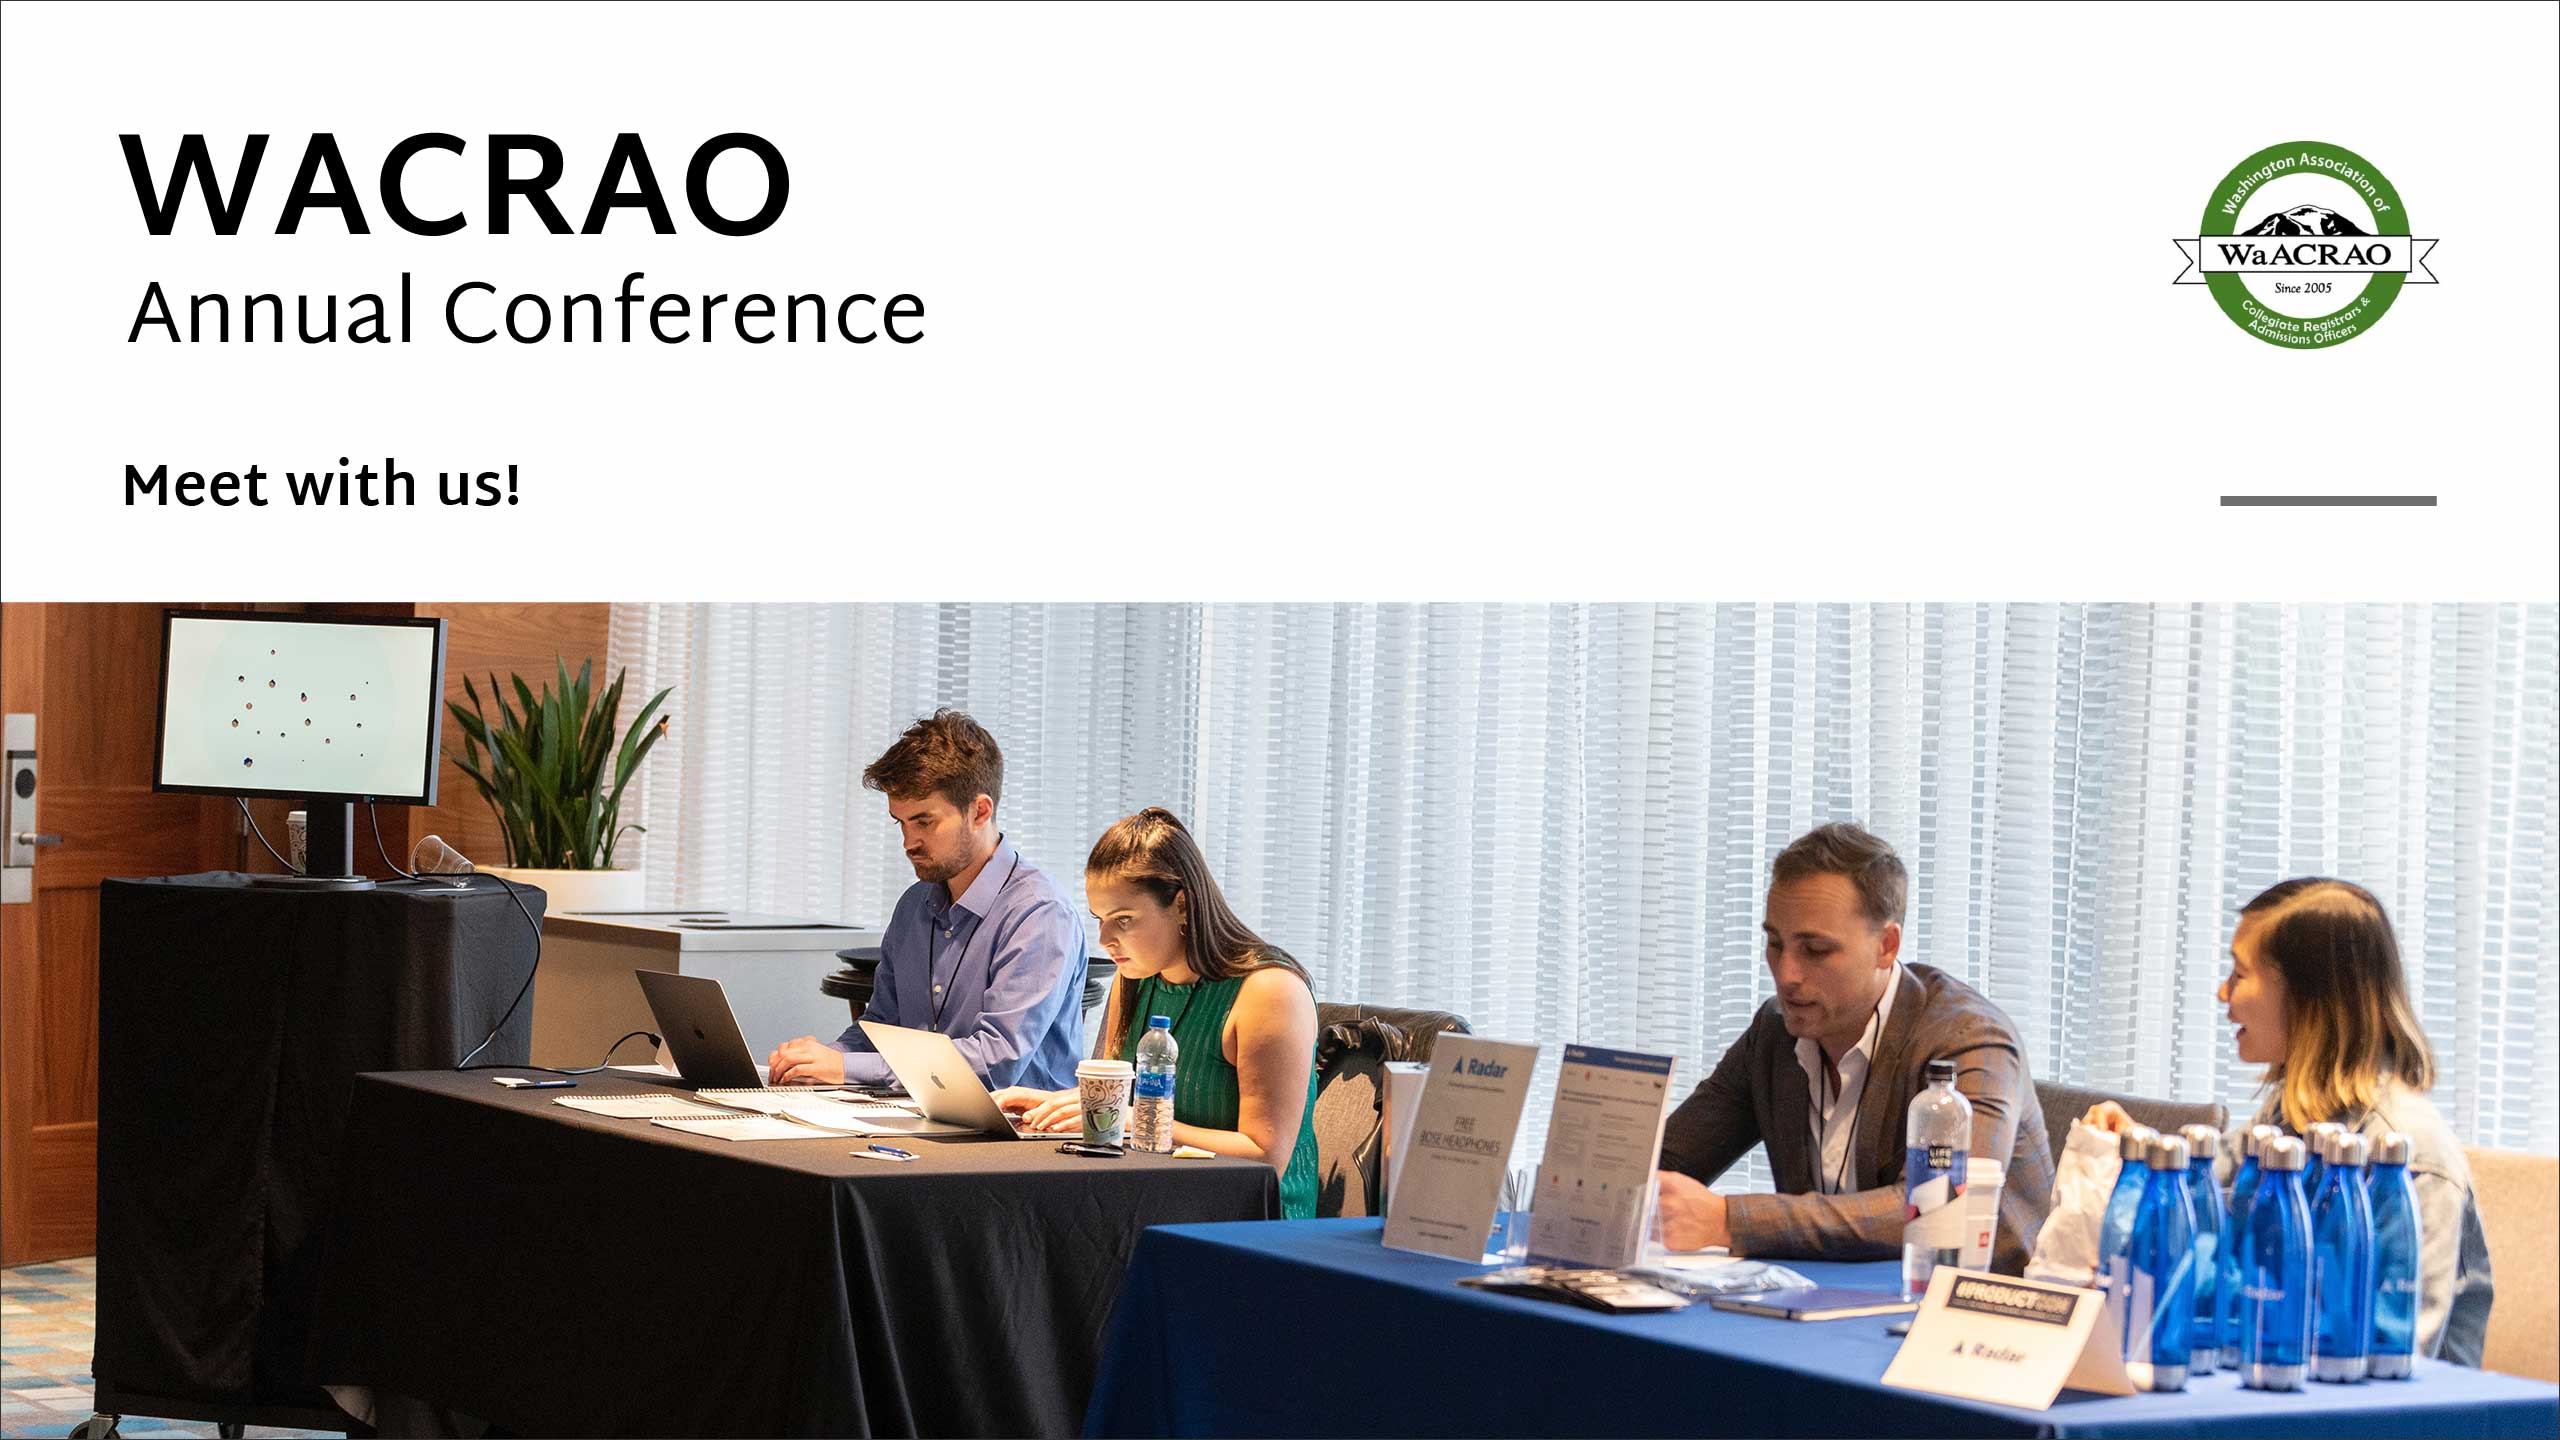 WACRAO Annual Conference